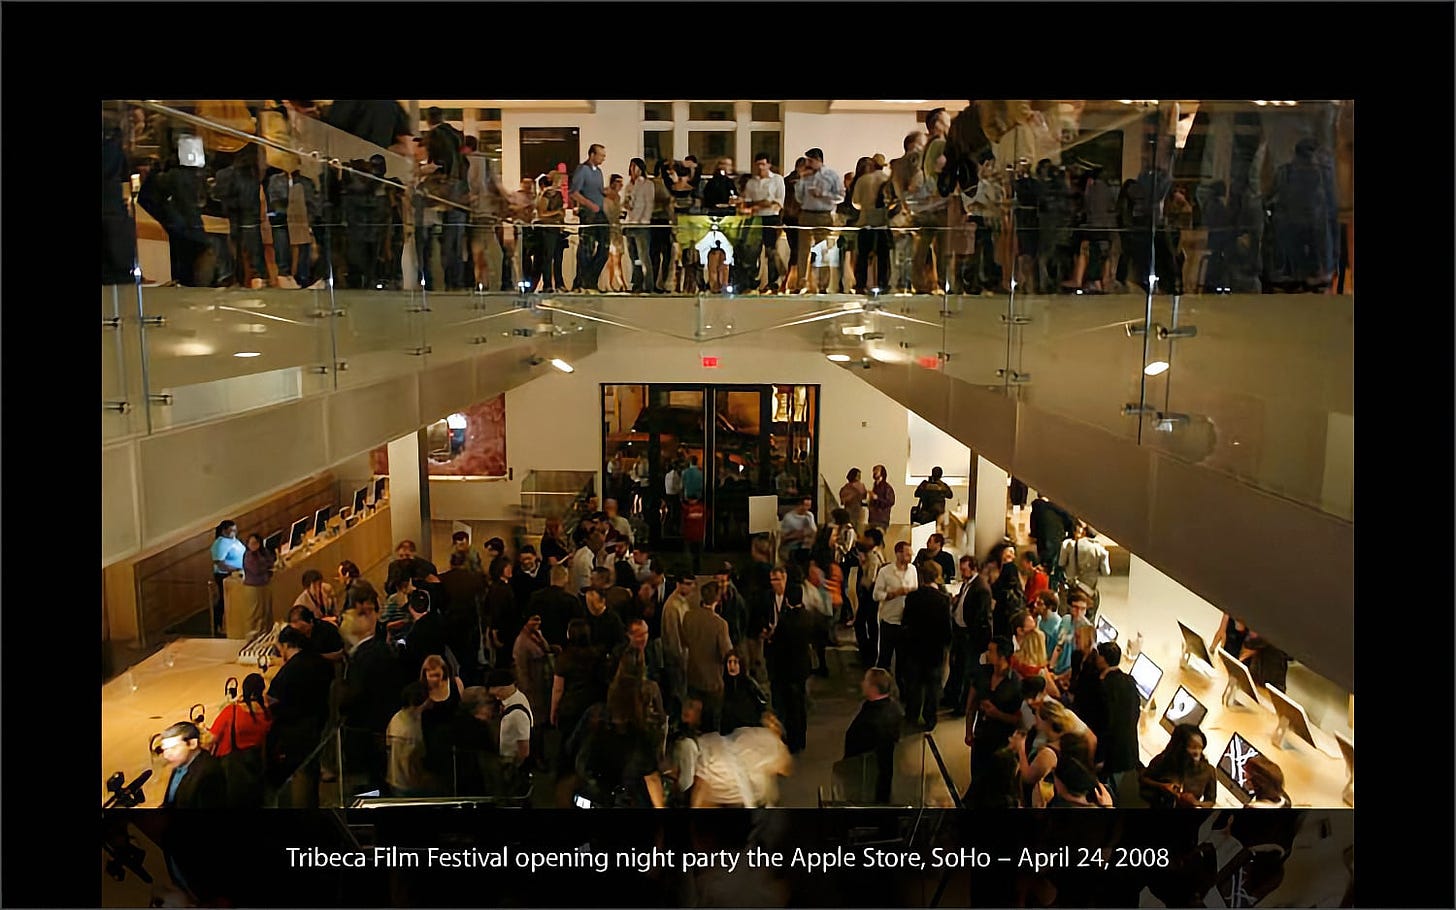 Tribeca Film Festival opening night party at the Apple Store, SoHo – April 24, 2008.